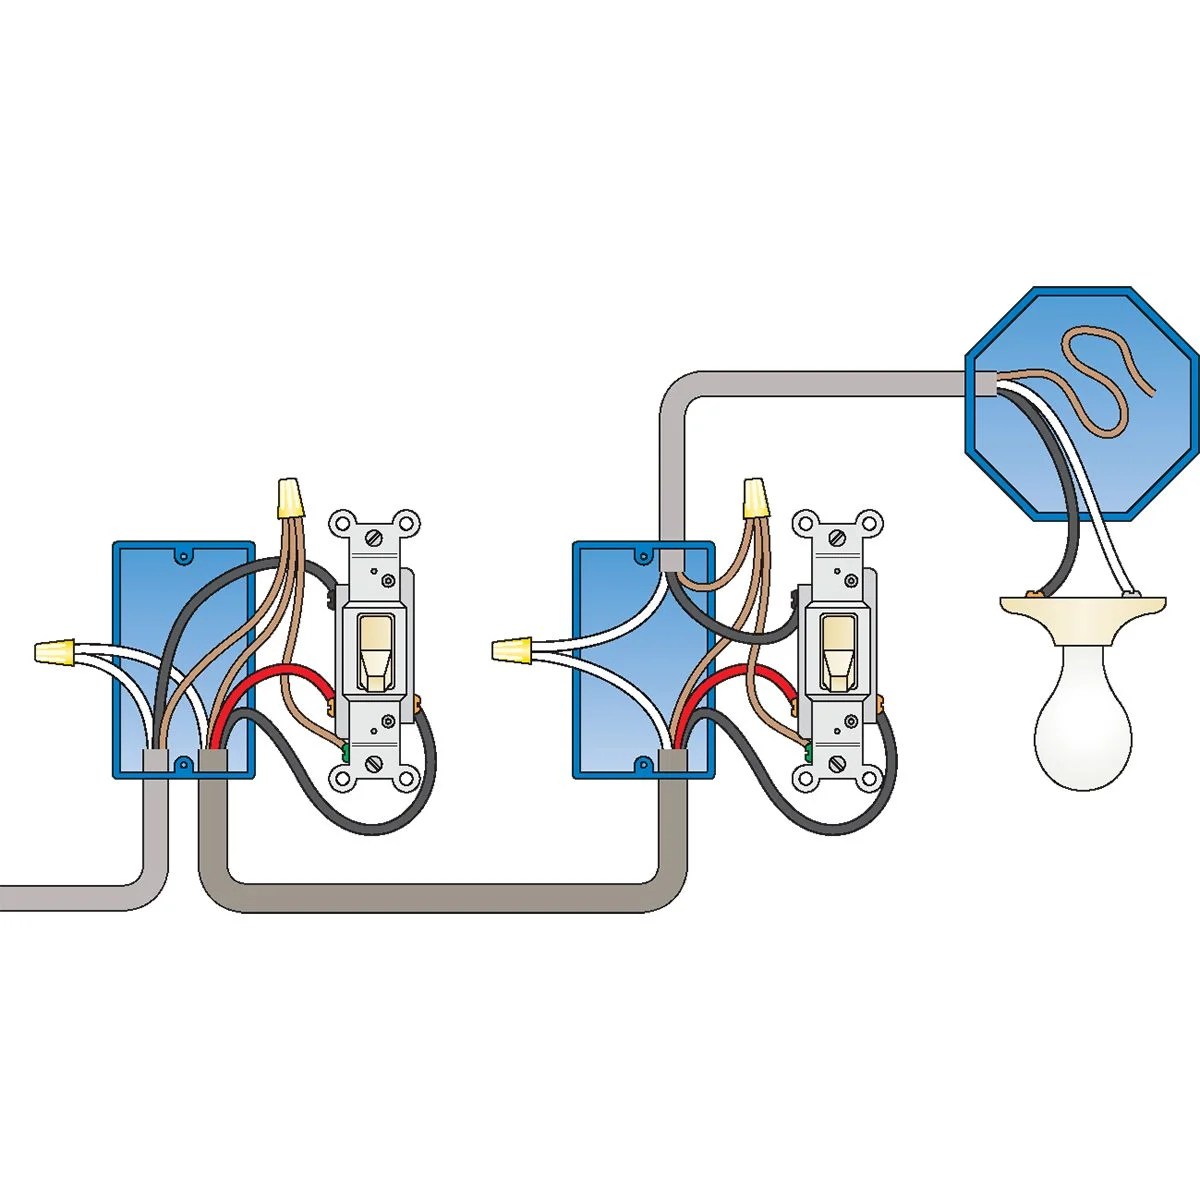 Wiring Diagram For Extension Cord